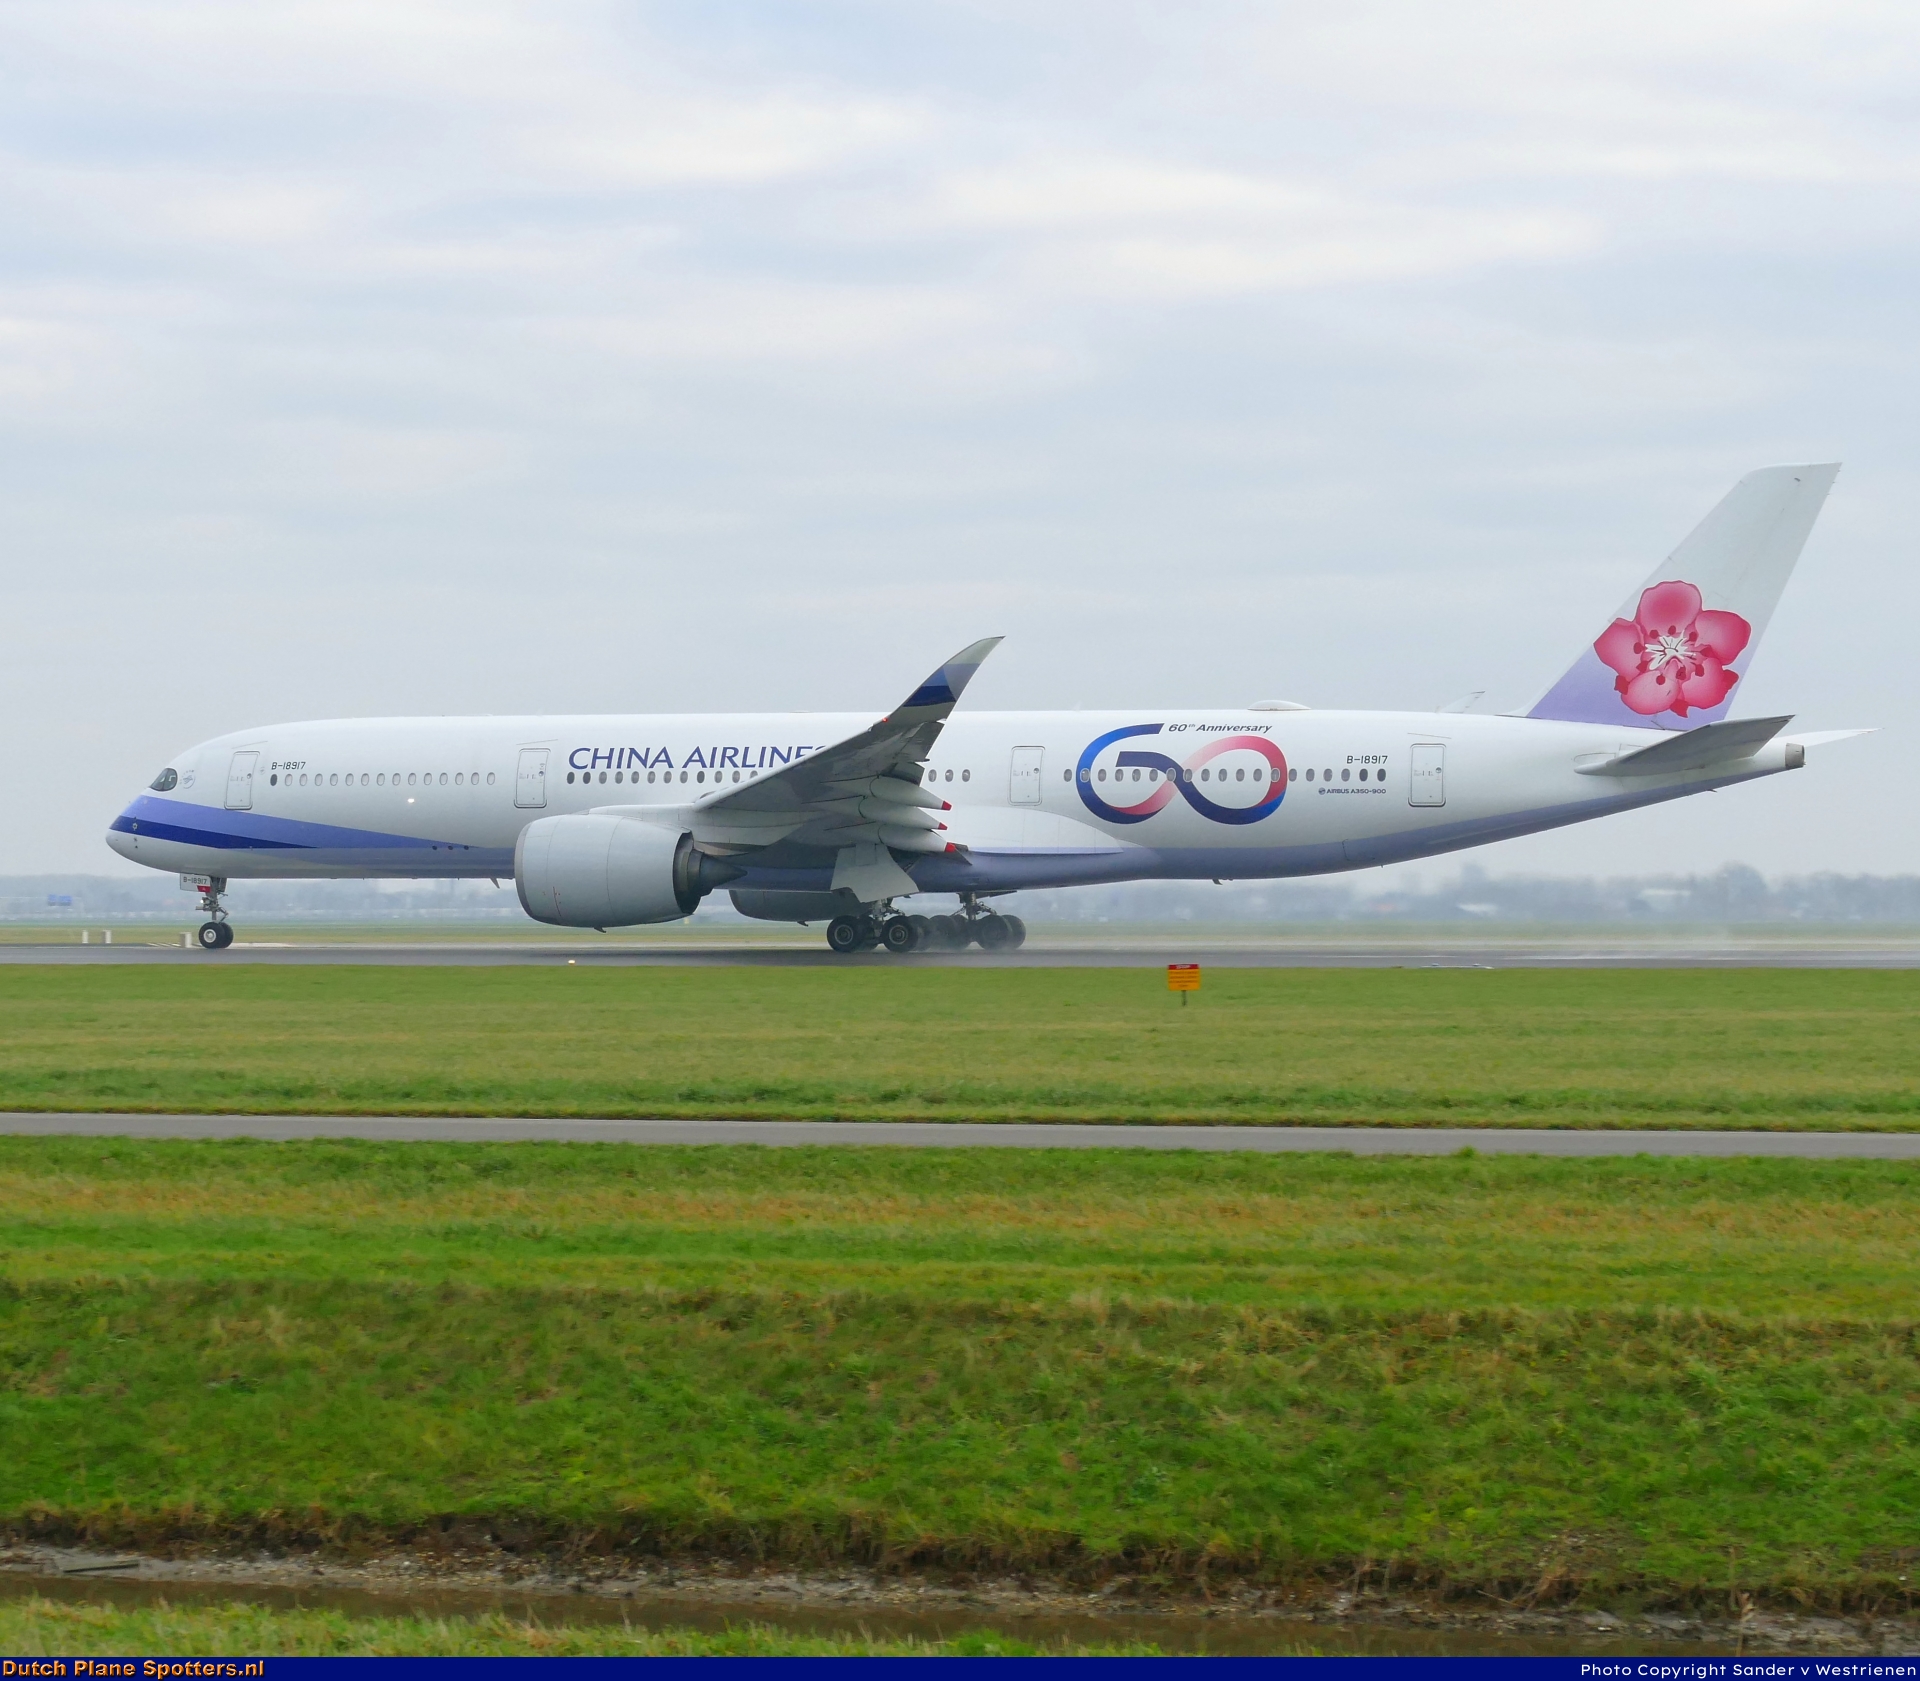 B-18917 Airbus A350-900 China Airlines by Sander v Westrienen